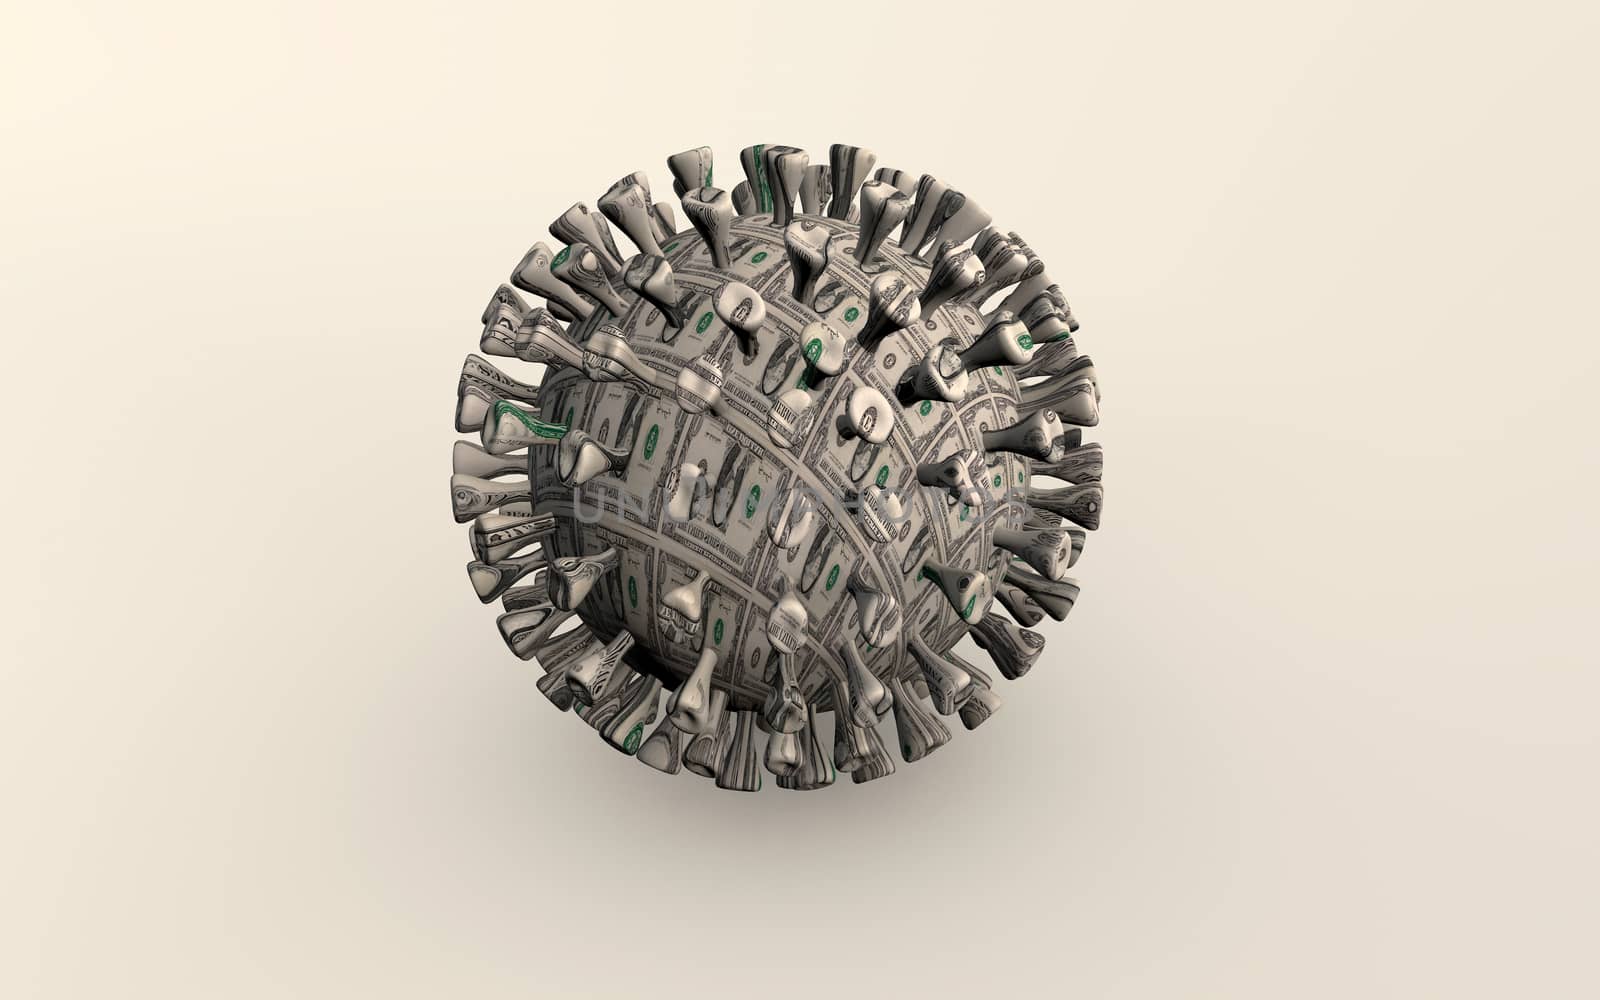 COVID-19 coronavirus disease outbreak impact on financial markets causing great depression. Concept of 2020 as the year of greatest crisis. 3d rendered of the virus with money texture isolated on white background.